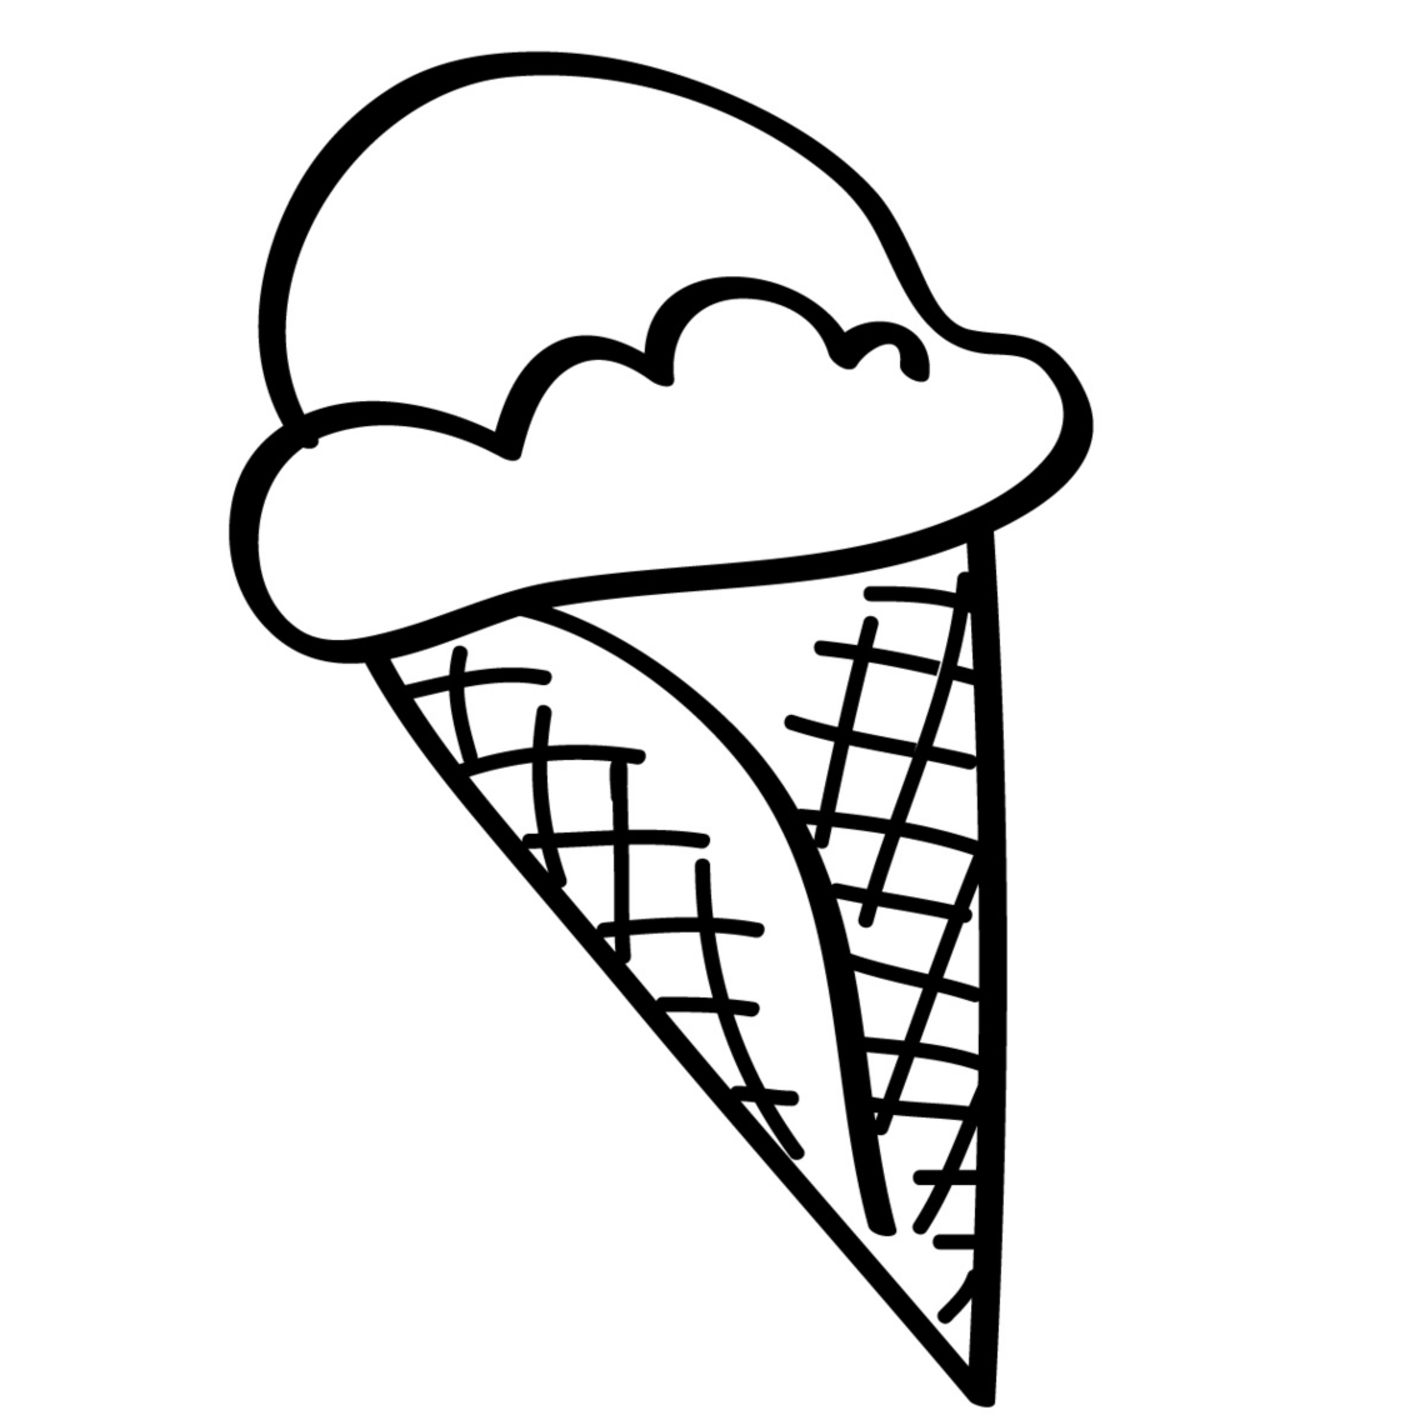 Free Printable Ice Cream Coloring Pages For Kids Effy Moom Free Coloring Picture wallpaper give a chance to color on the wall without getting in trouble! Fill the walls of your home or office with stress-relieving [effymoom.blogspot.com]